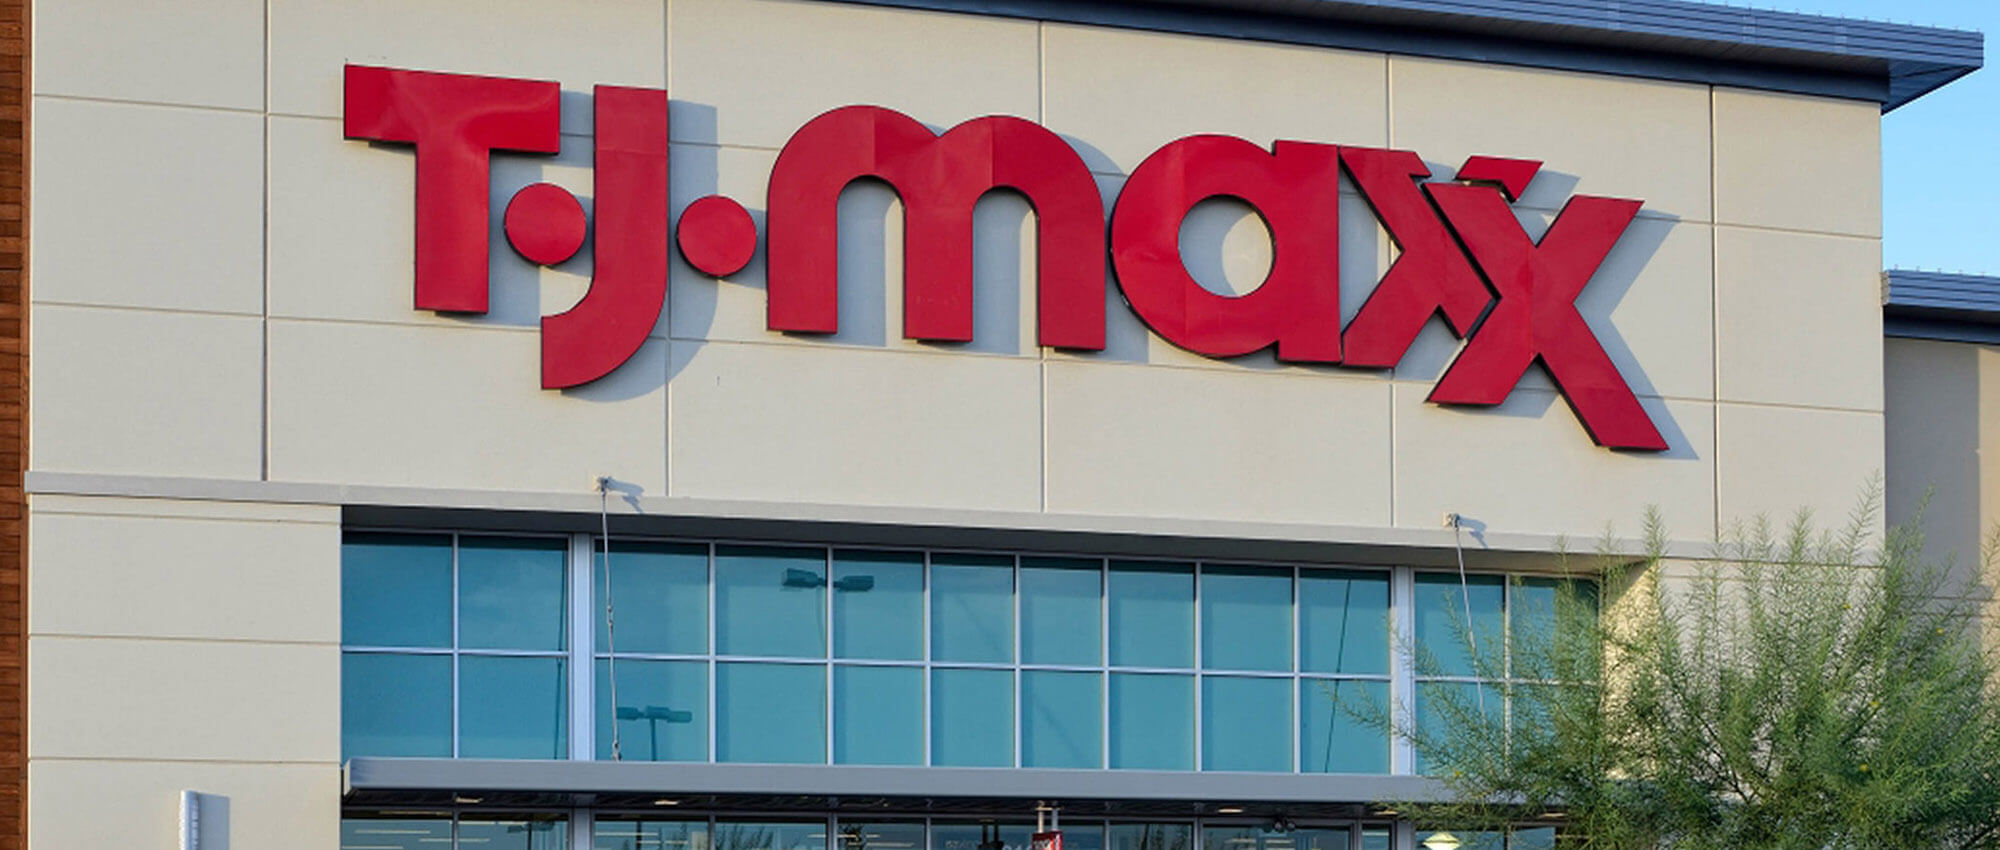 Opening date confirmed for Calcutta T.J. Maxx store